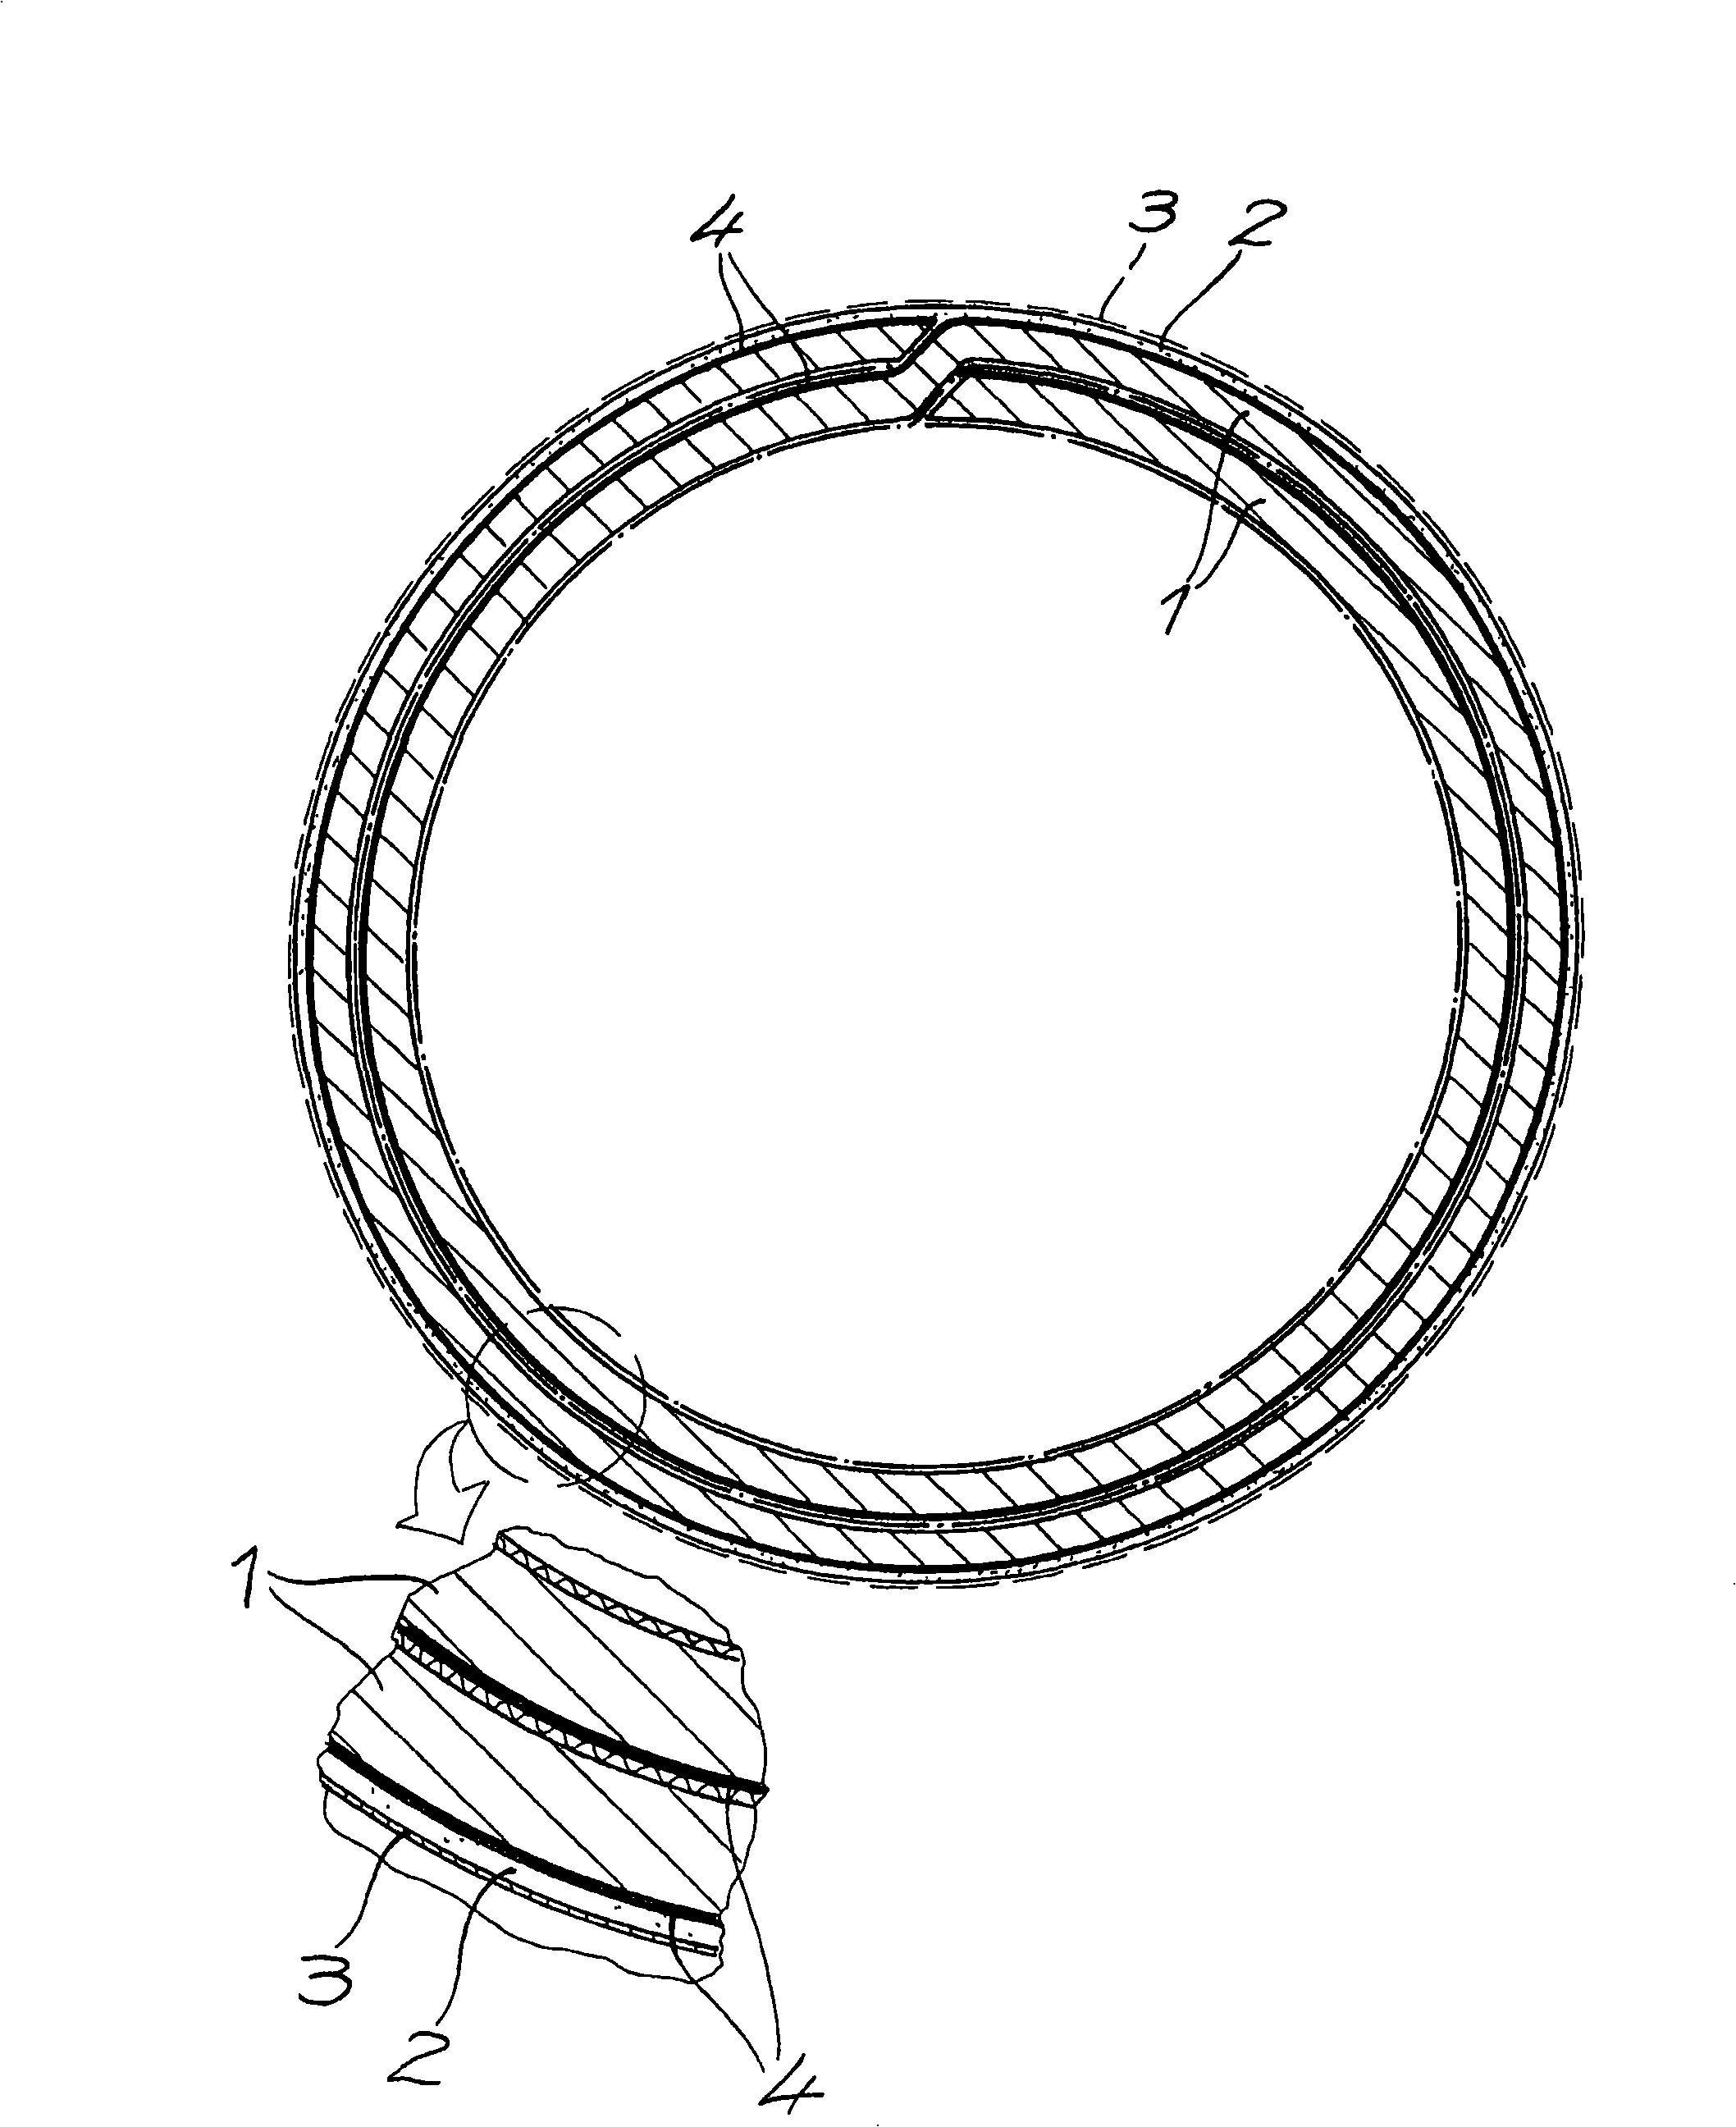 Automobile pipeline and method for producing automobile pipeline